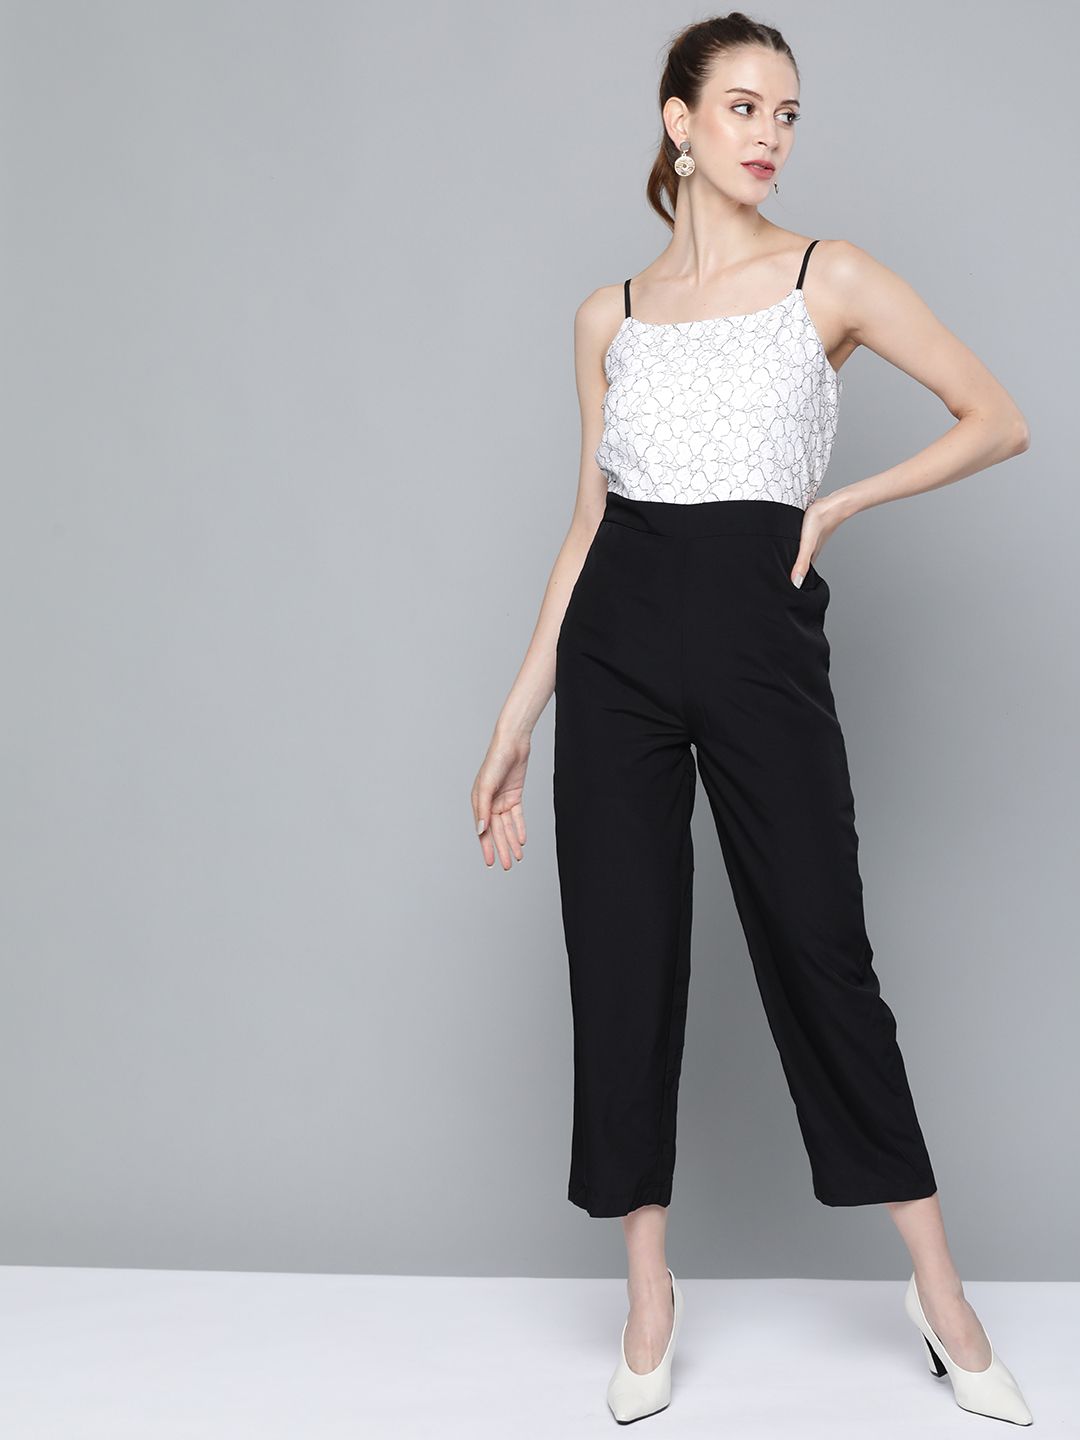 SASSAFRAS White & Black Basic Jumpsuit with Lace Inserts Price in India